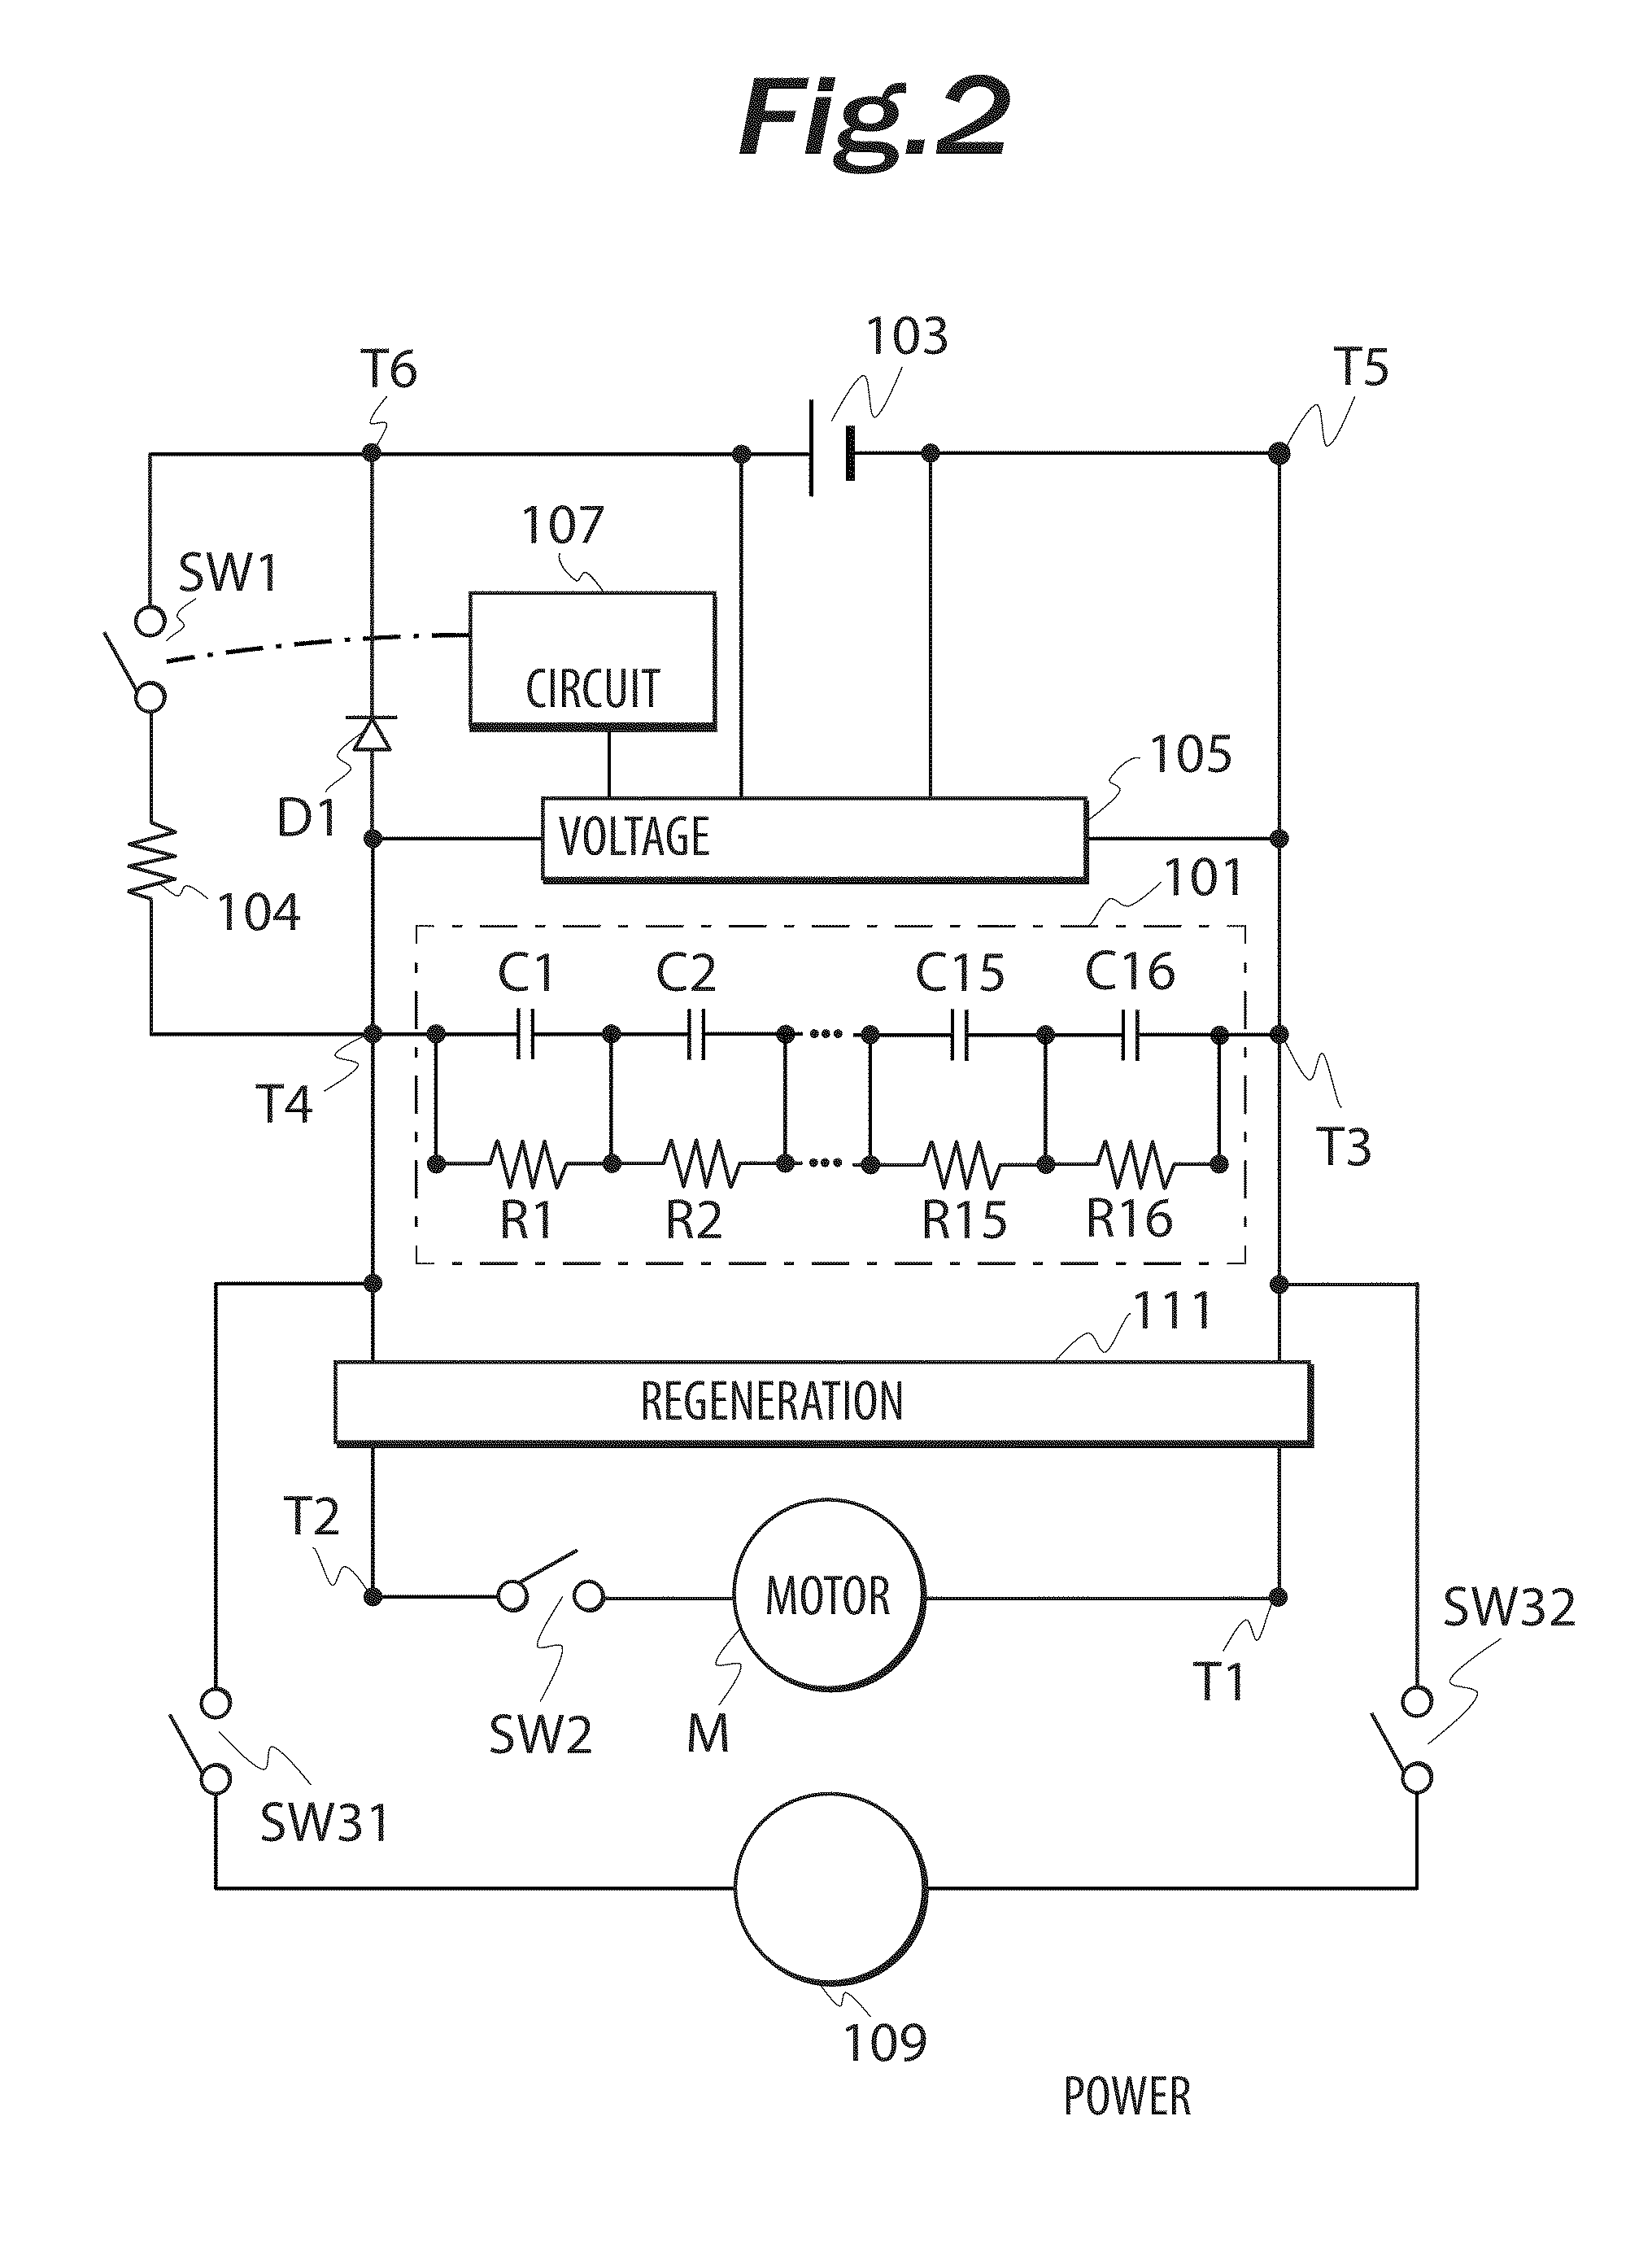 Direct-Current Power Source Apparatus